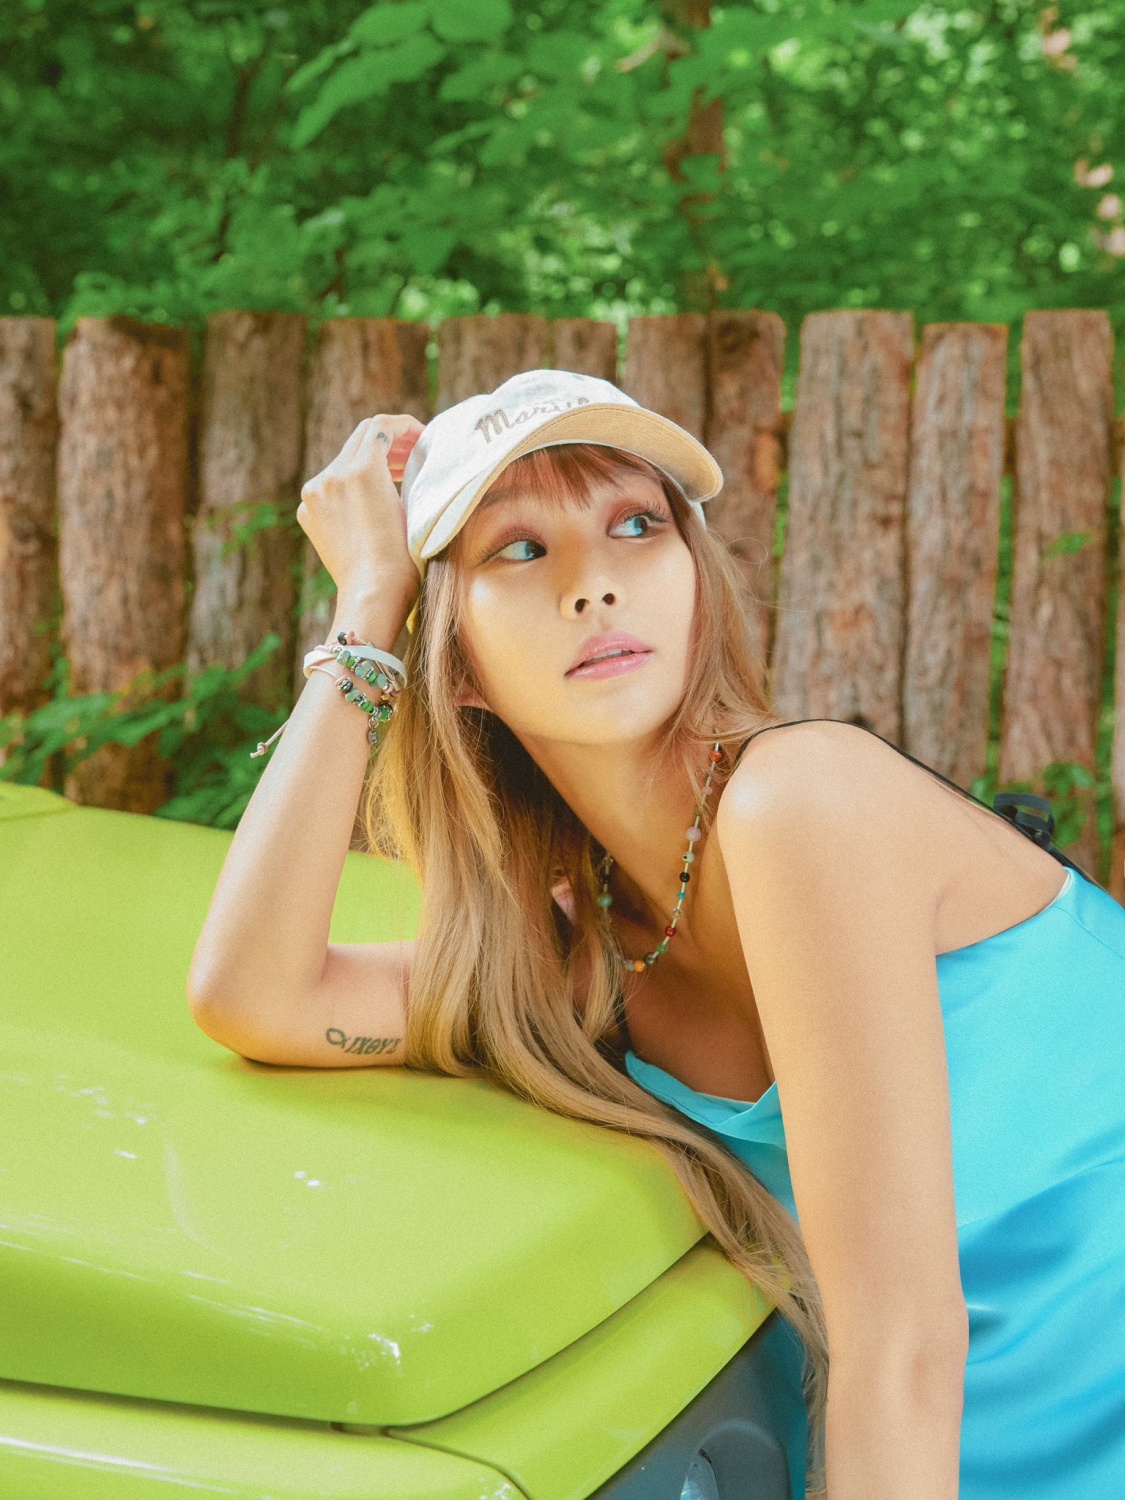 Hyolyn, new song 'What is love' MV teaser released... Pre-release of some new songs